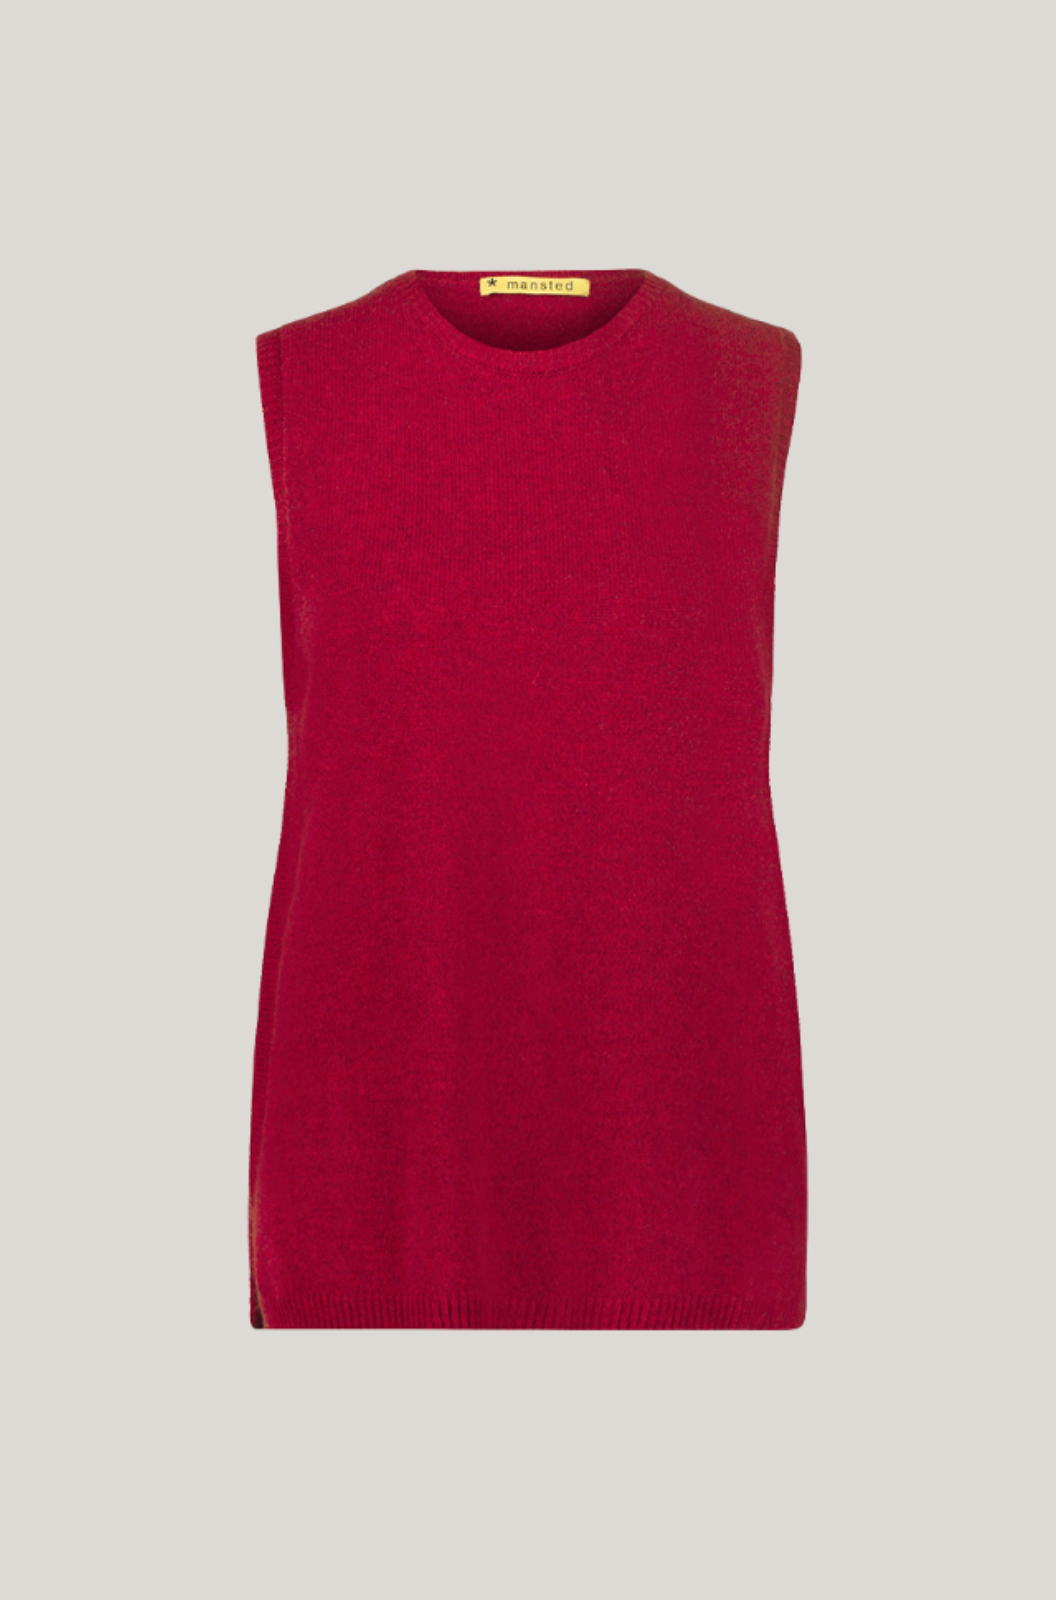 Mansted Denmark Mitos Lambswool Crew Vest in Red